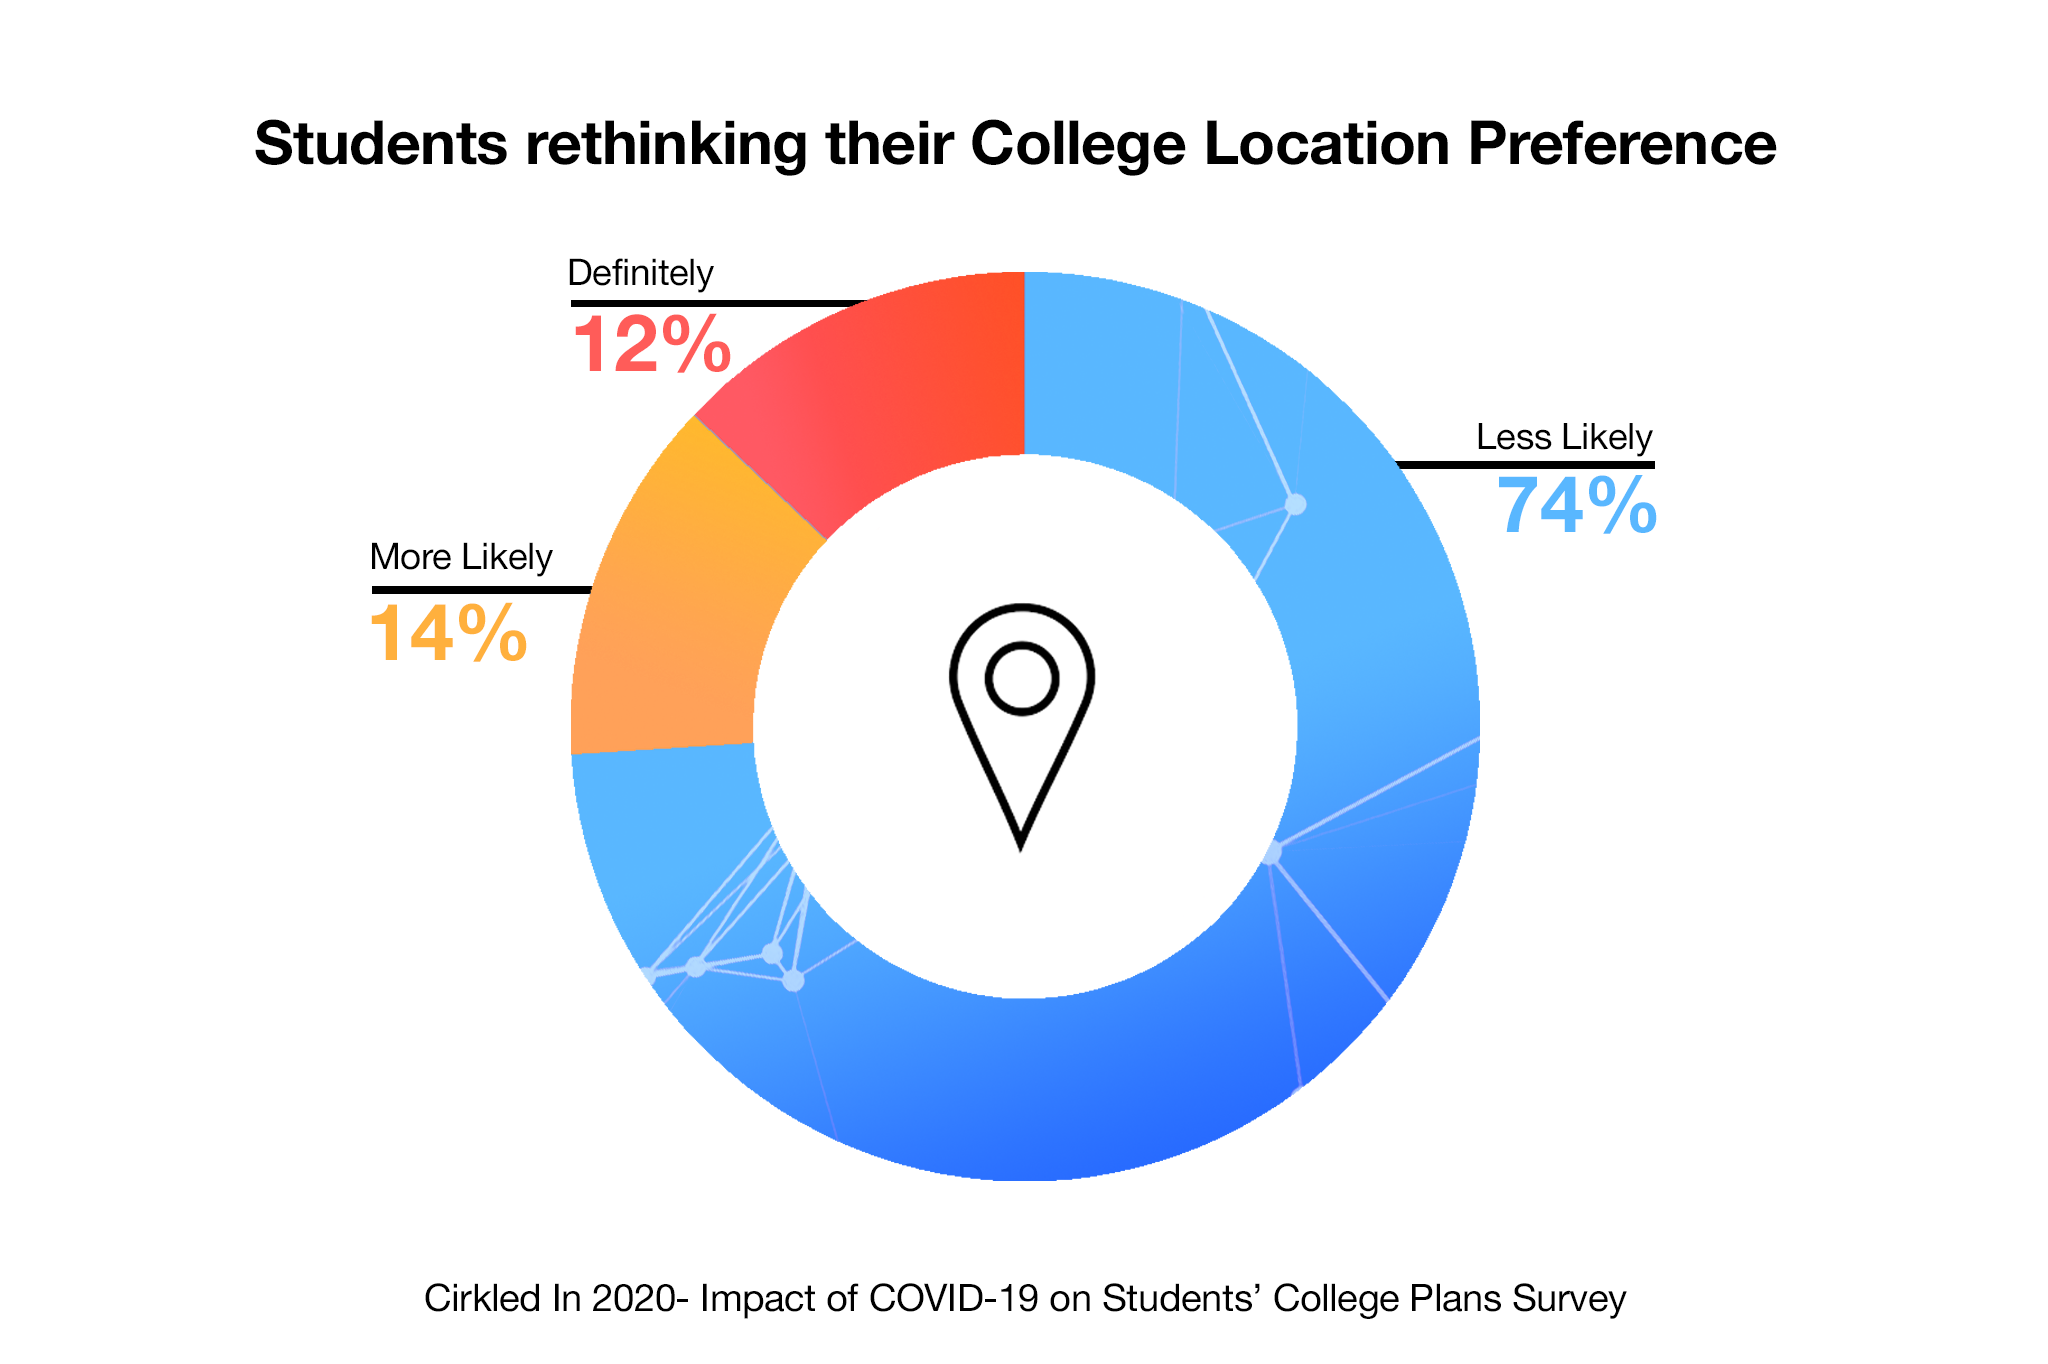 Post COVID - 26% students rethinking their college location